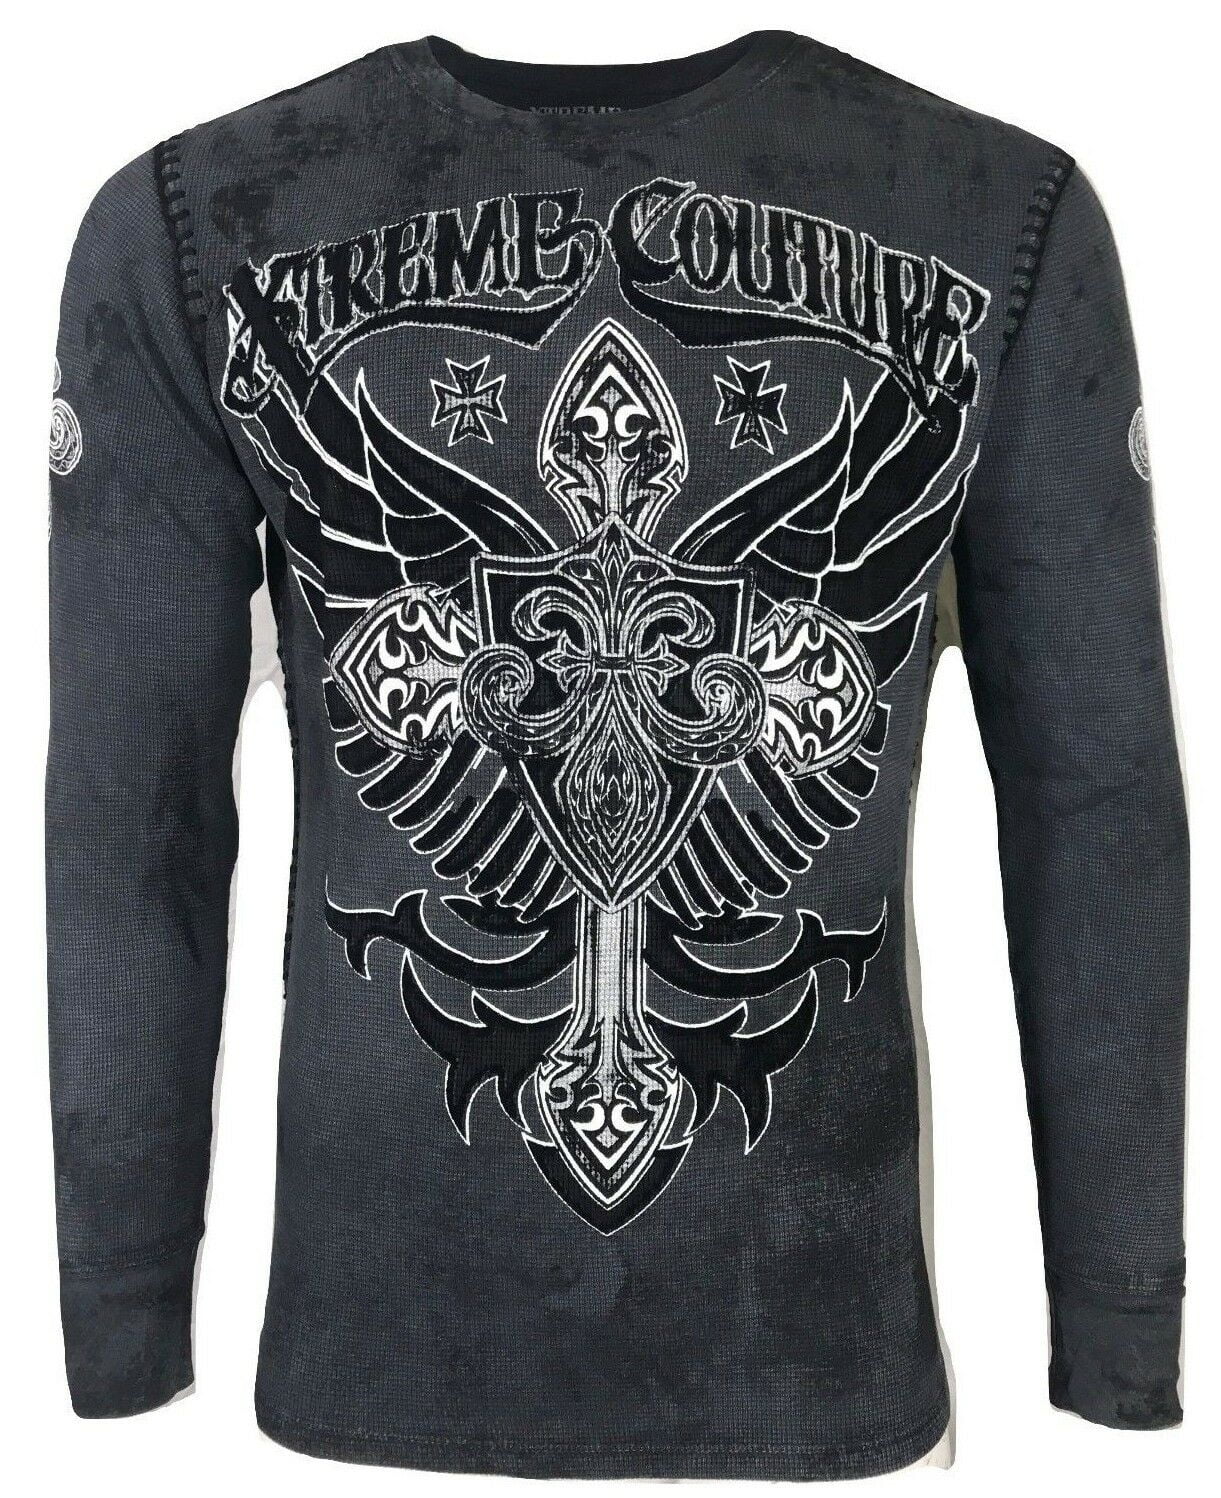 Xtreme Couture by AFFLICTION Men's THERMAL BRONZE ARMS Skull Biker ...